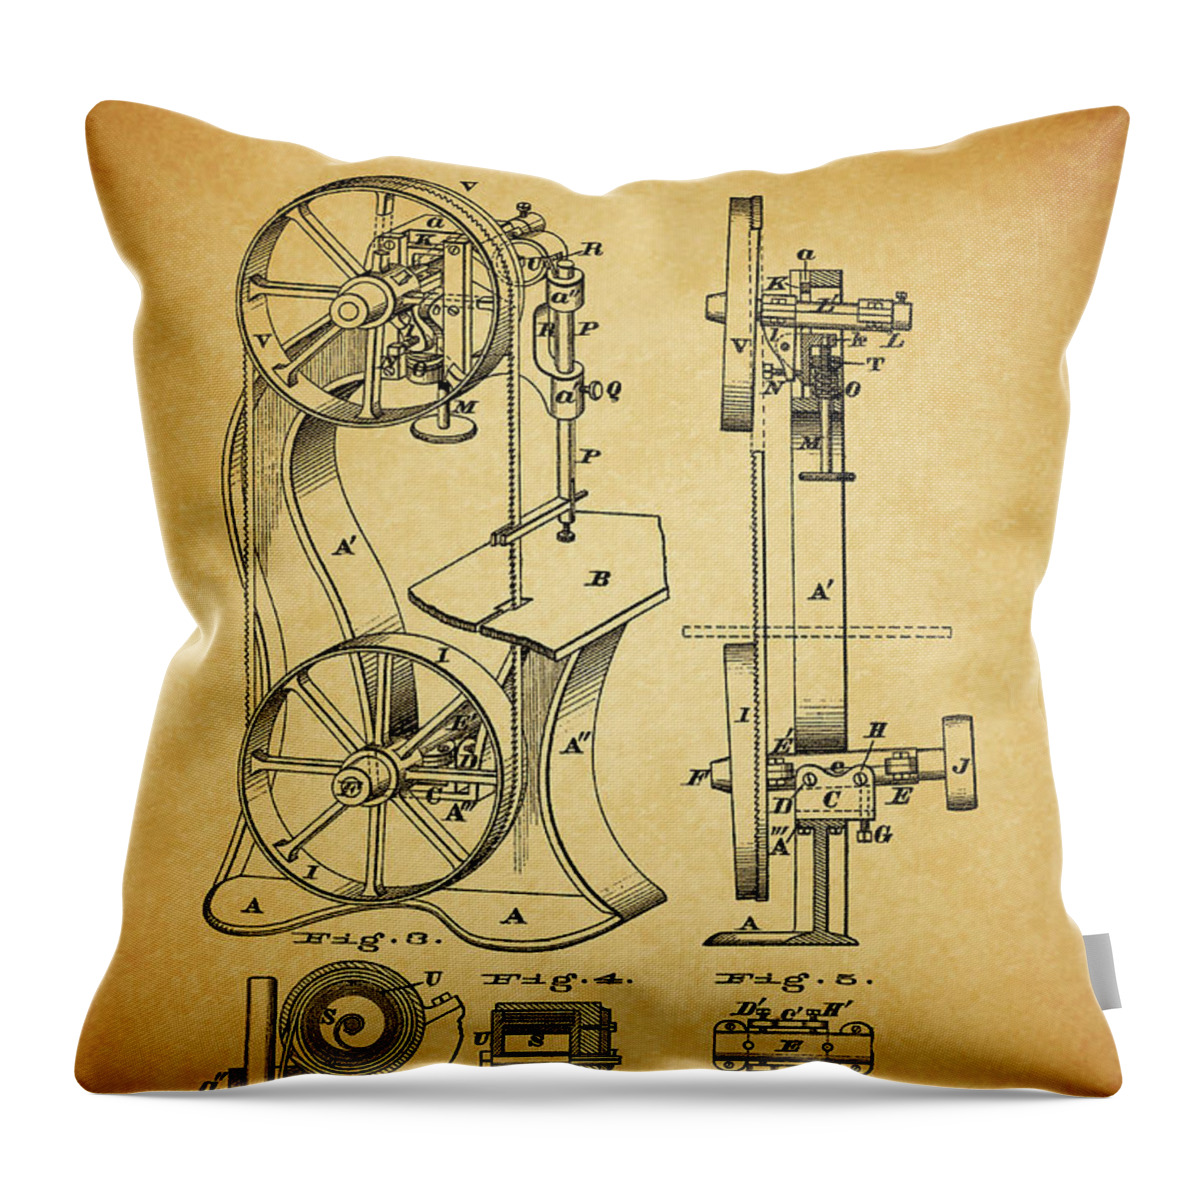 1871 Band Saw Machine Patent Throw Pillow featuring the drawing 1871 Band Saw Machine Patent by Dan Sproul